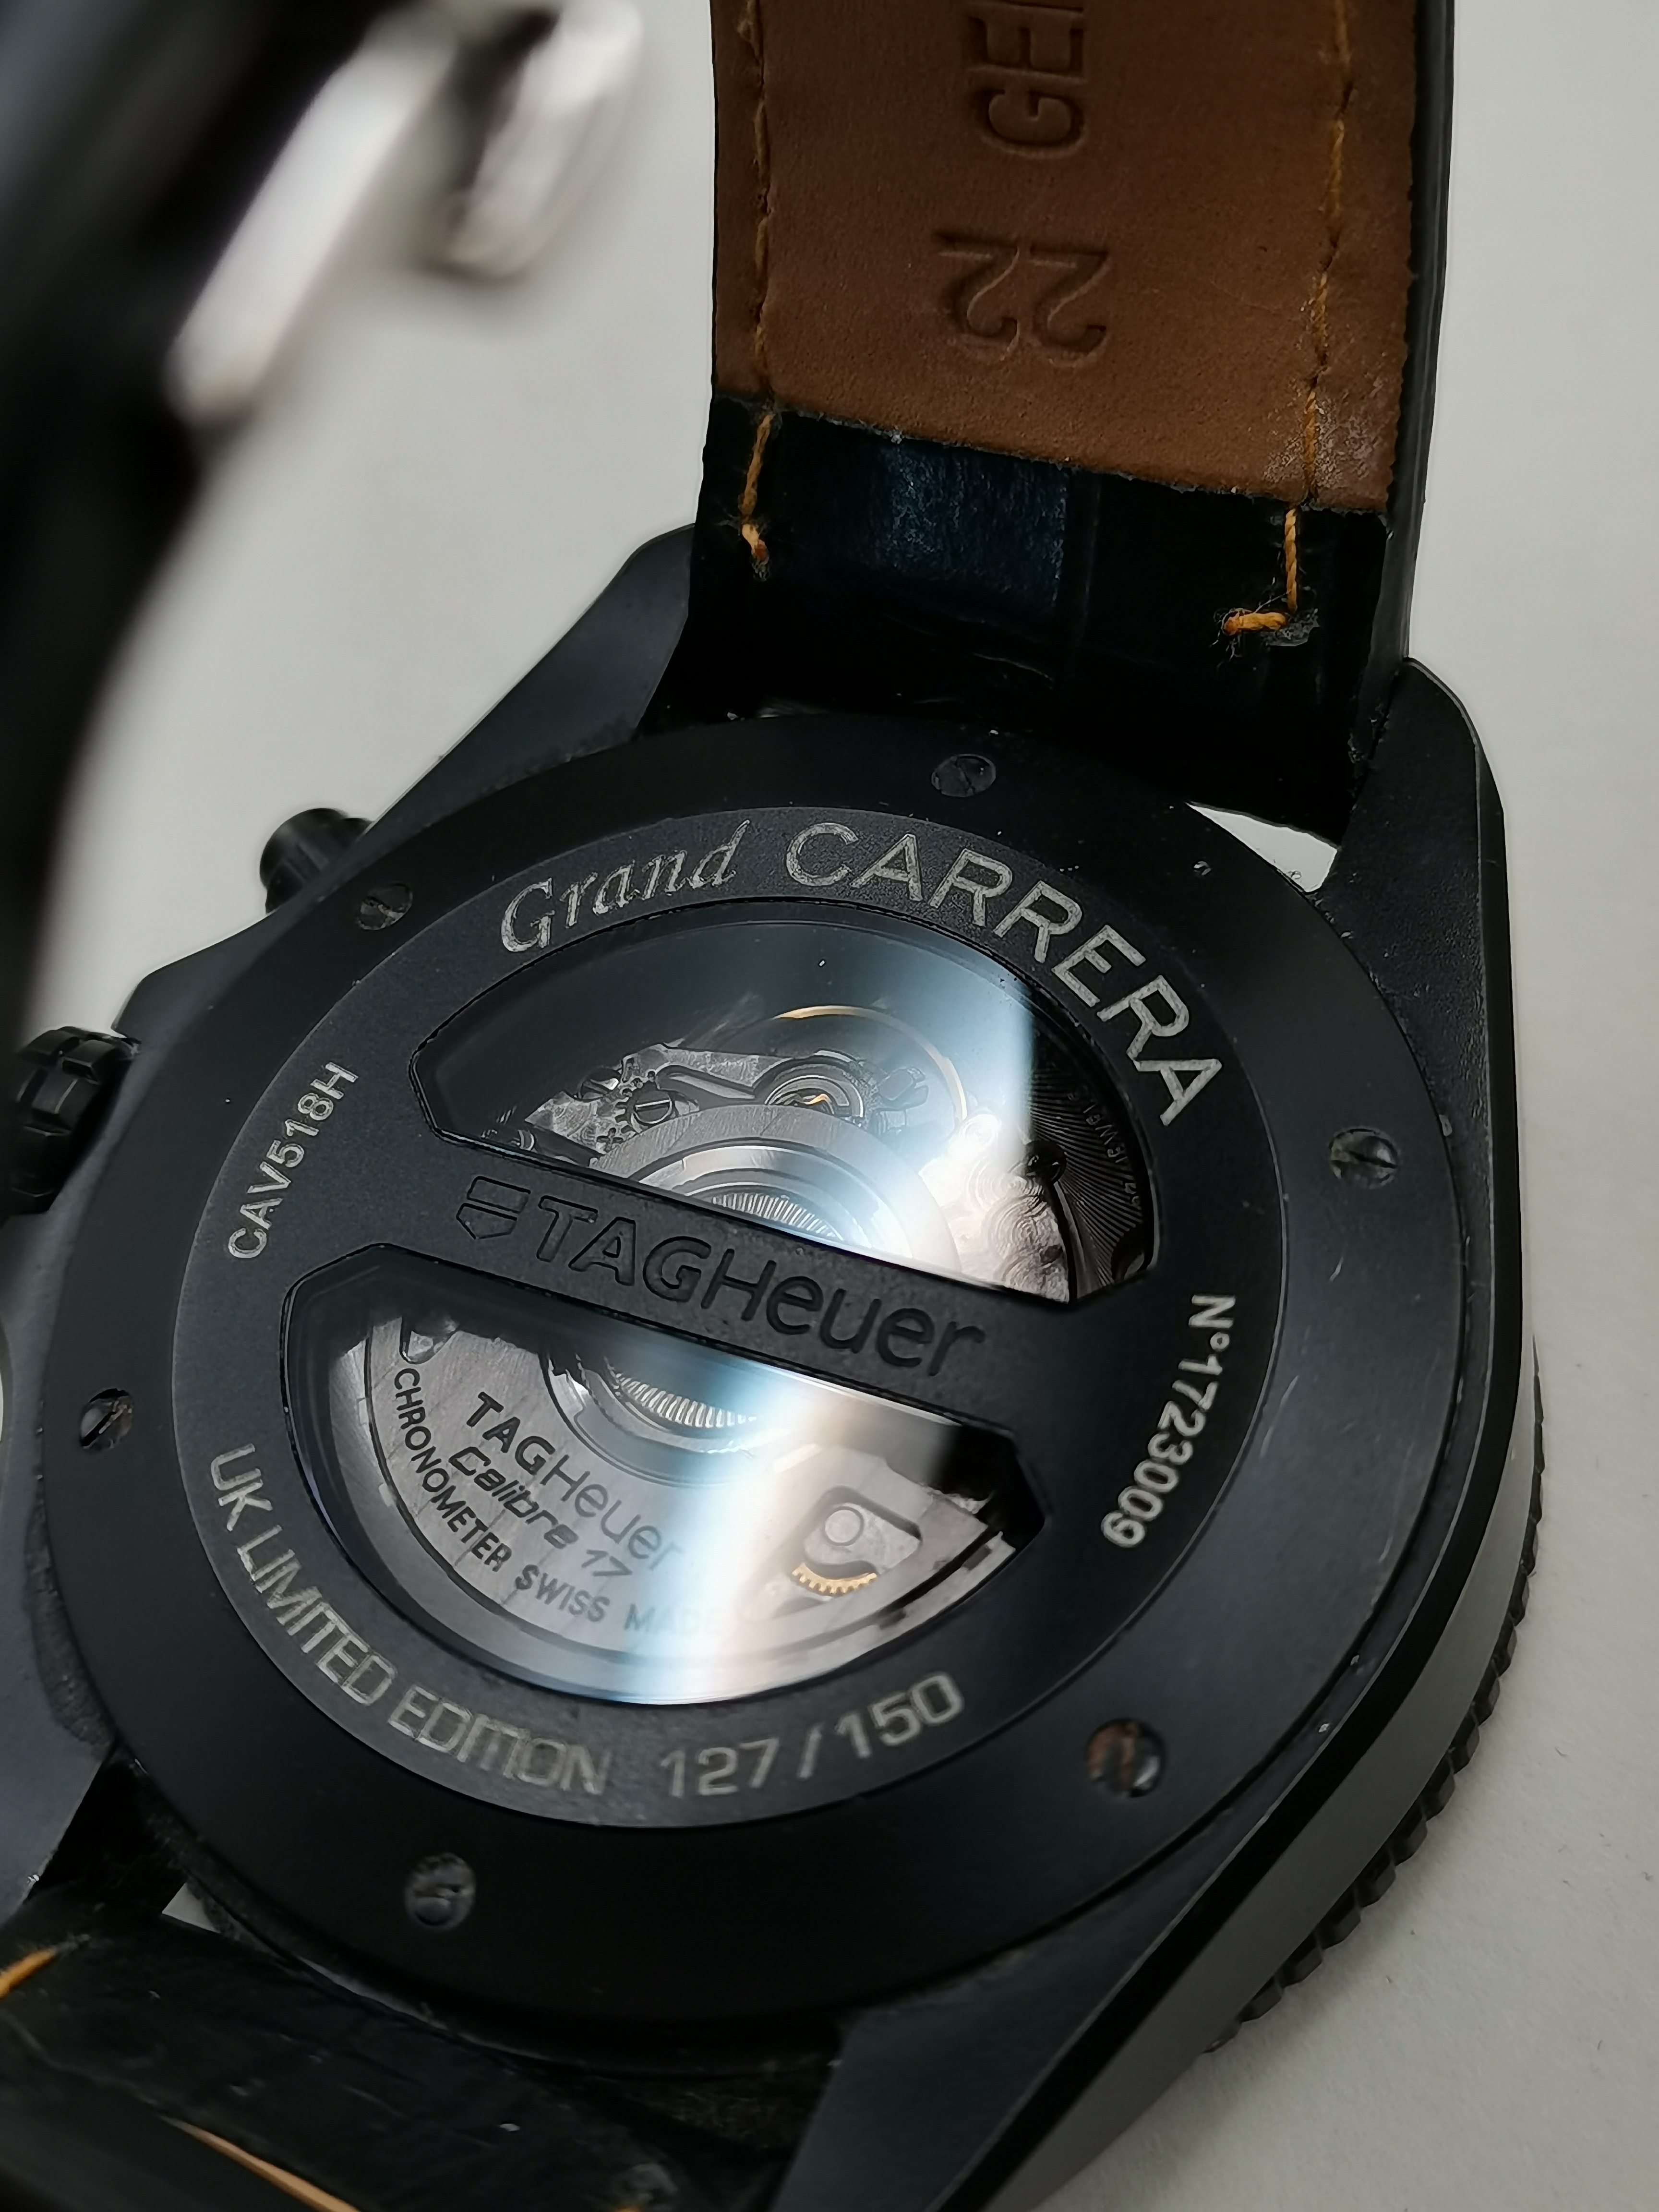 TAG Heuer Grand Carrera Calibre 17 Automatic wrist watch. - Image 6 of 6